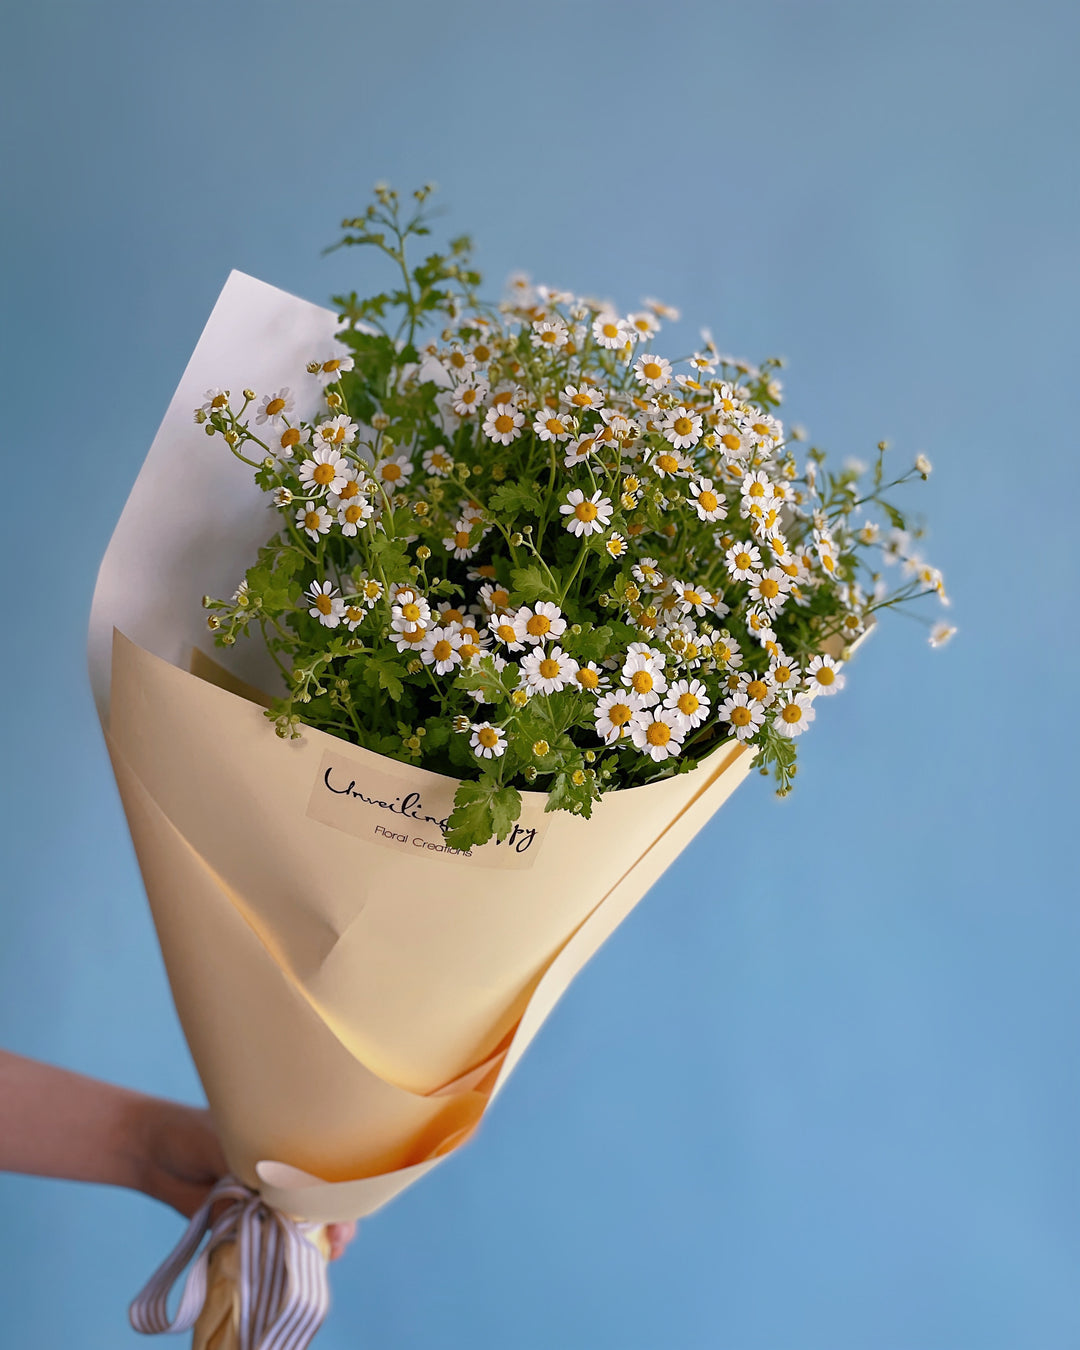 Flavour of the Month: CHAMOMILE